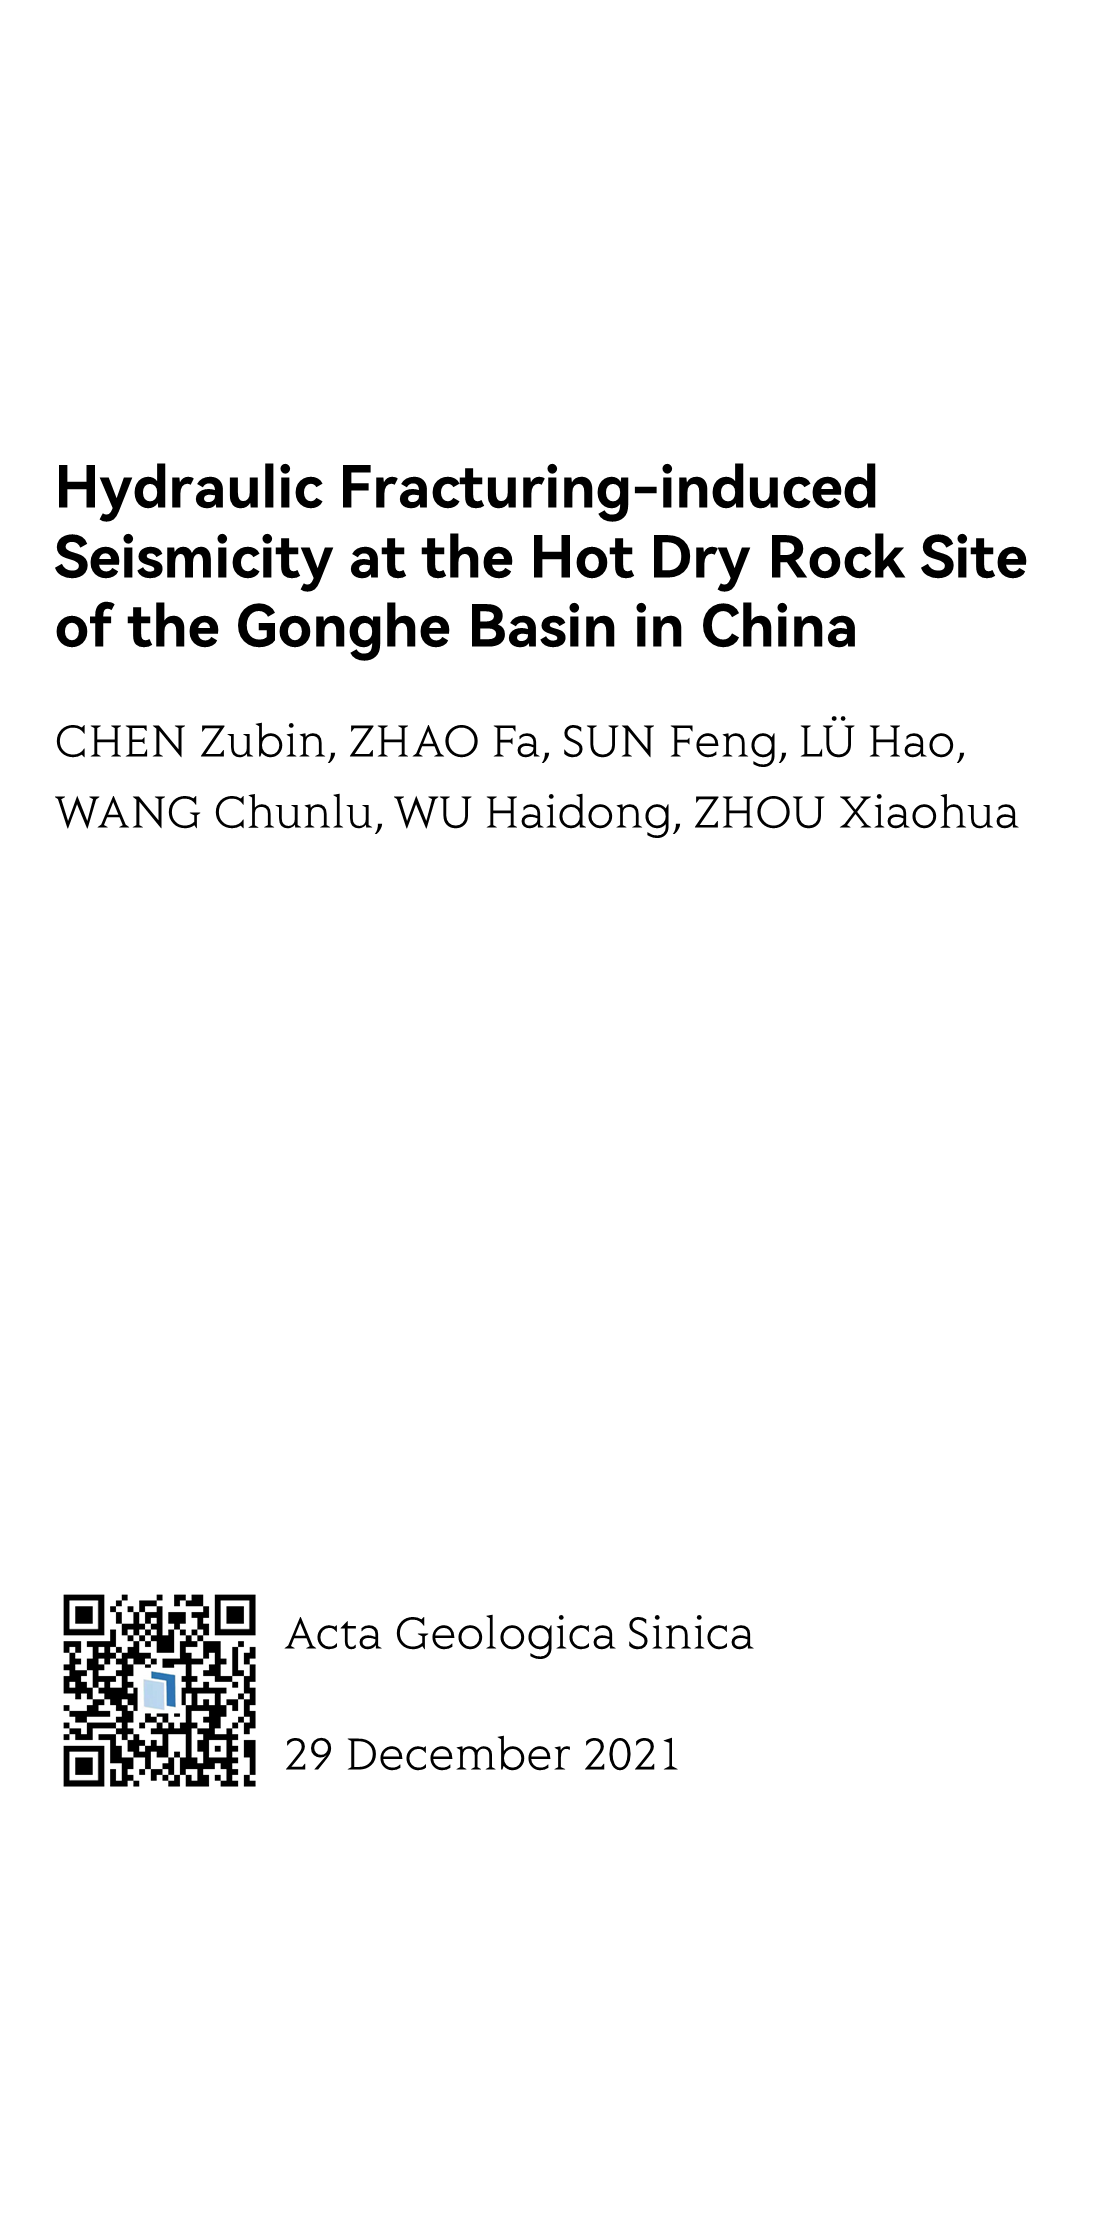 Hydraulic Fracturing-induced Seismicity at the Hot Dry Rock Site of the Gonghe Basin in China_1